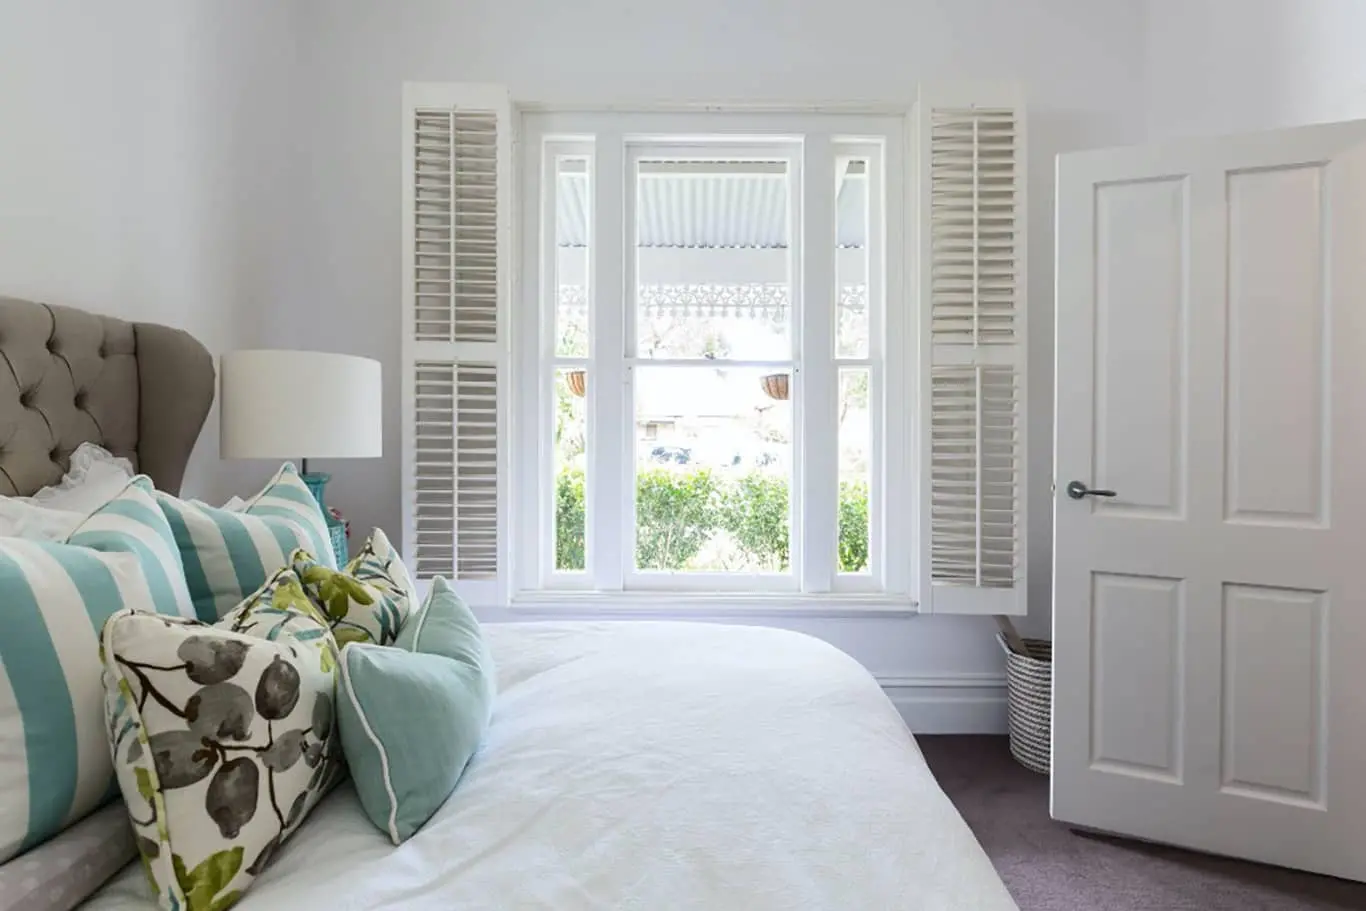 Traditional shutters on a bedroom window